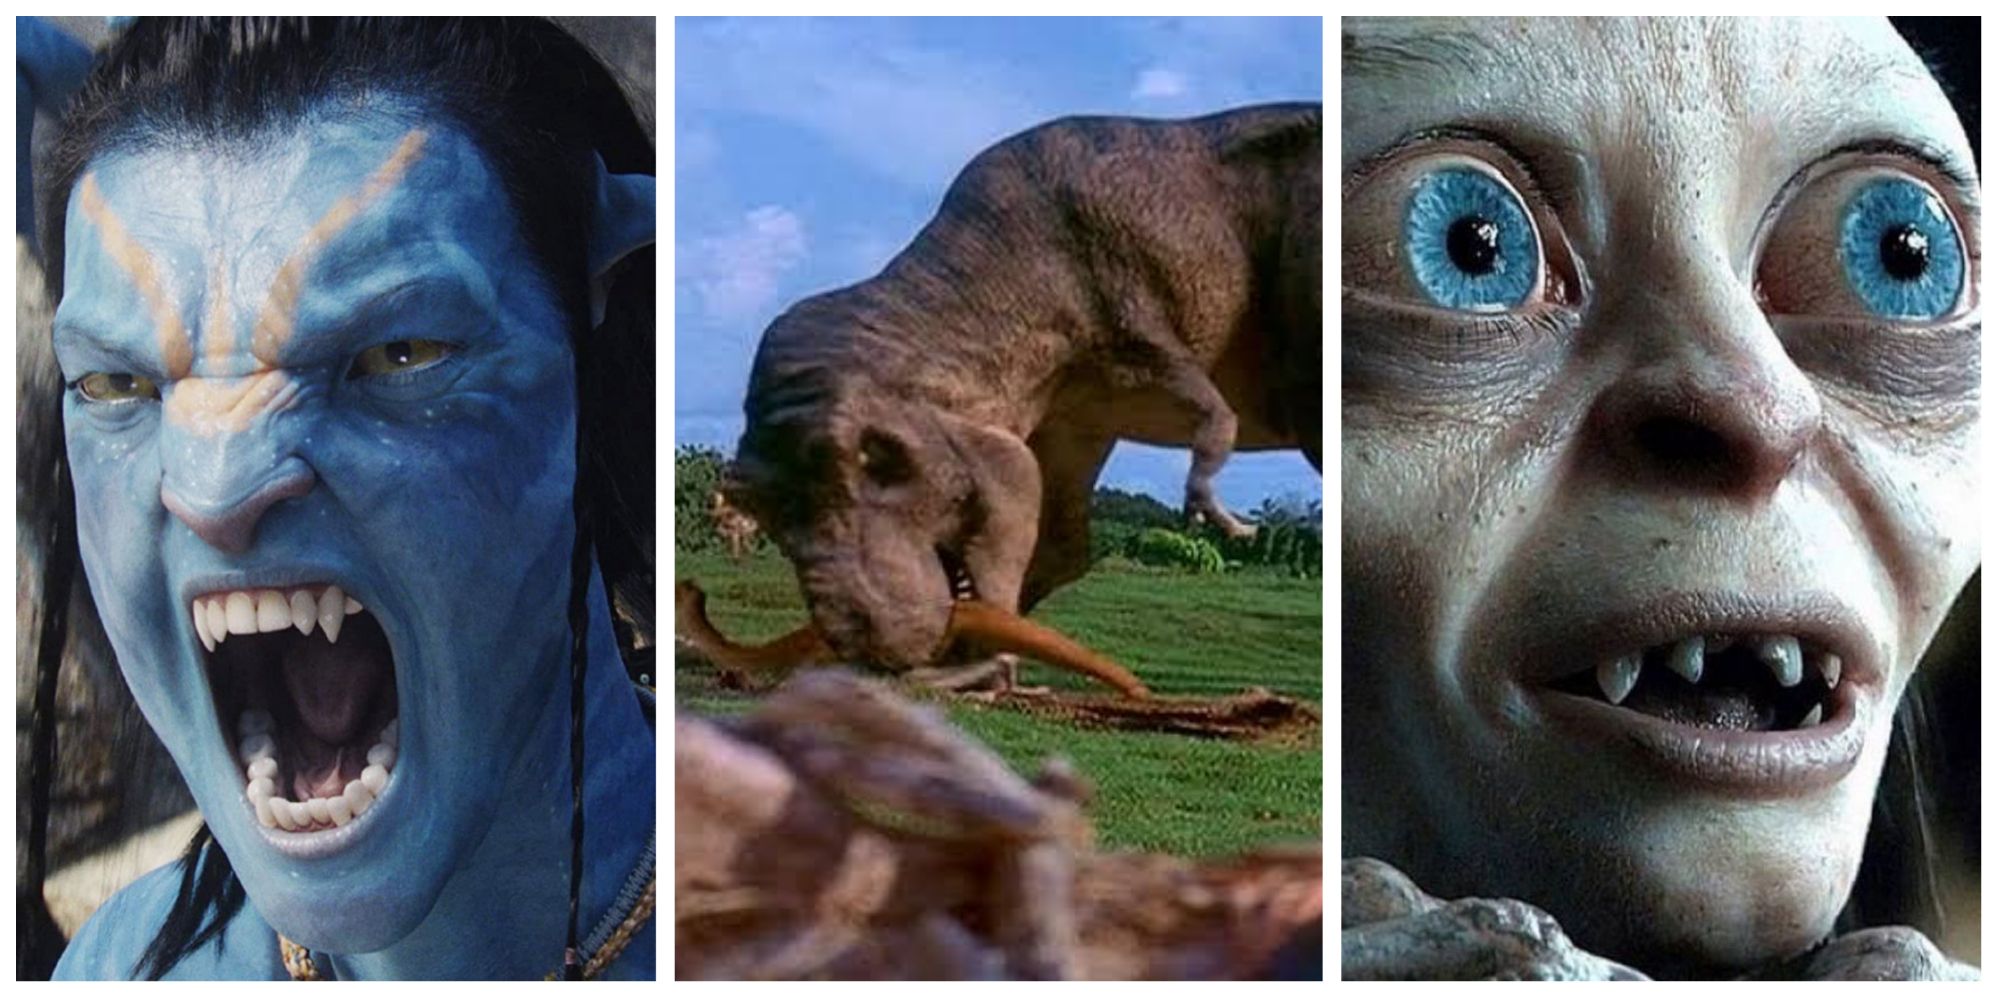 Collage of avatar, jurassic park, lord of the rings